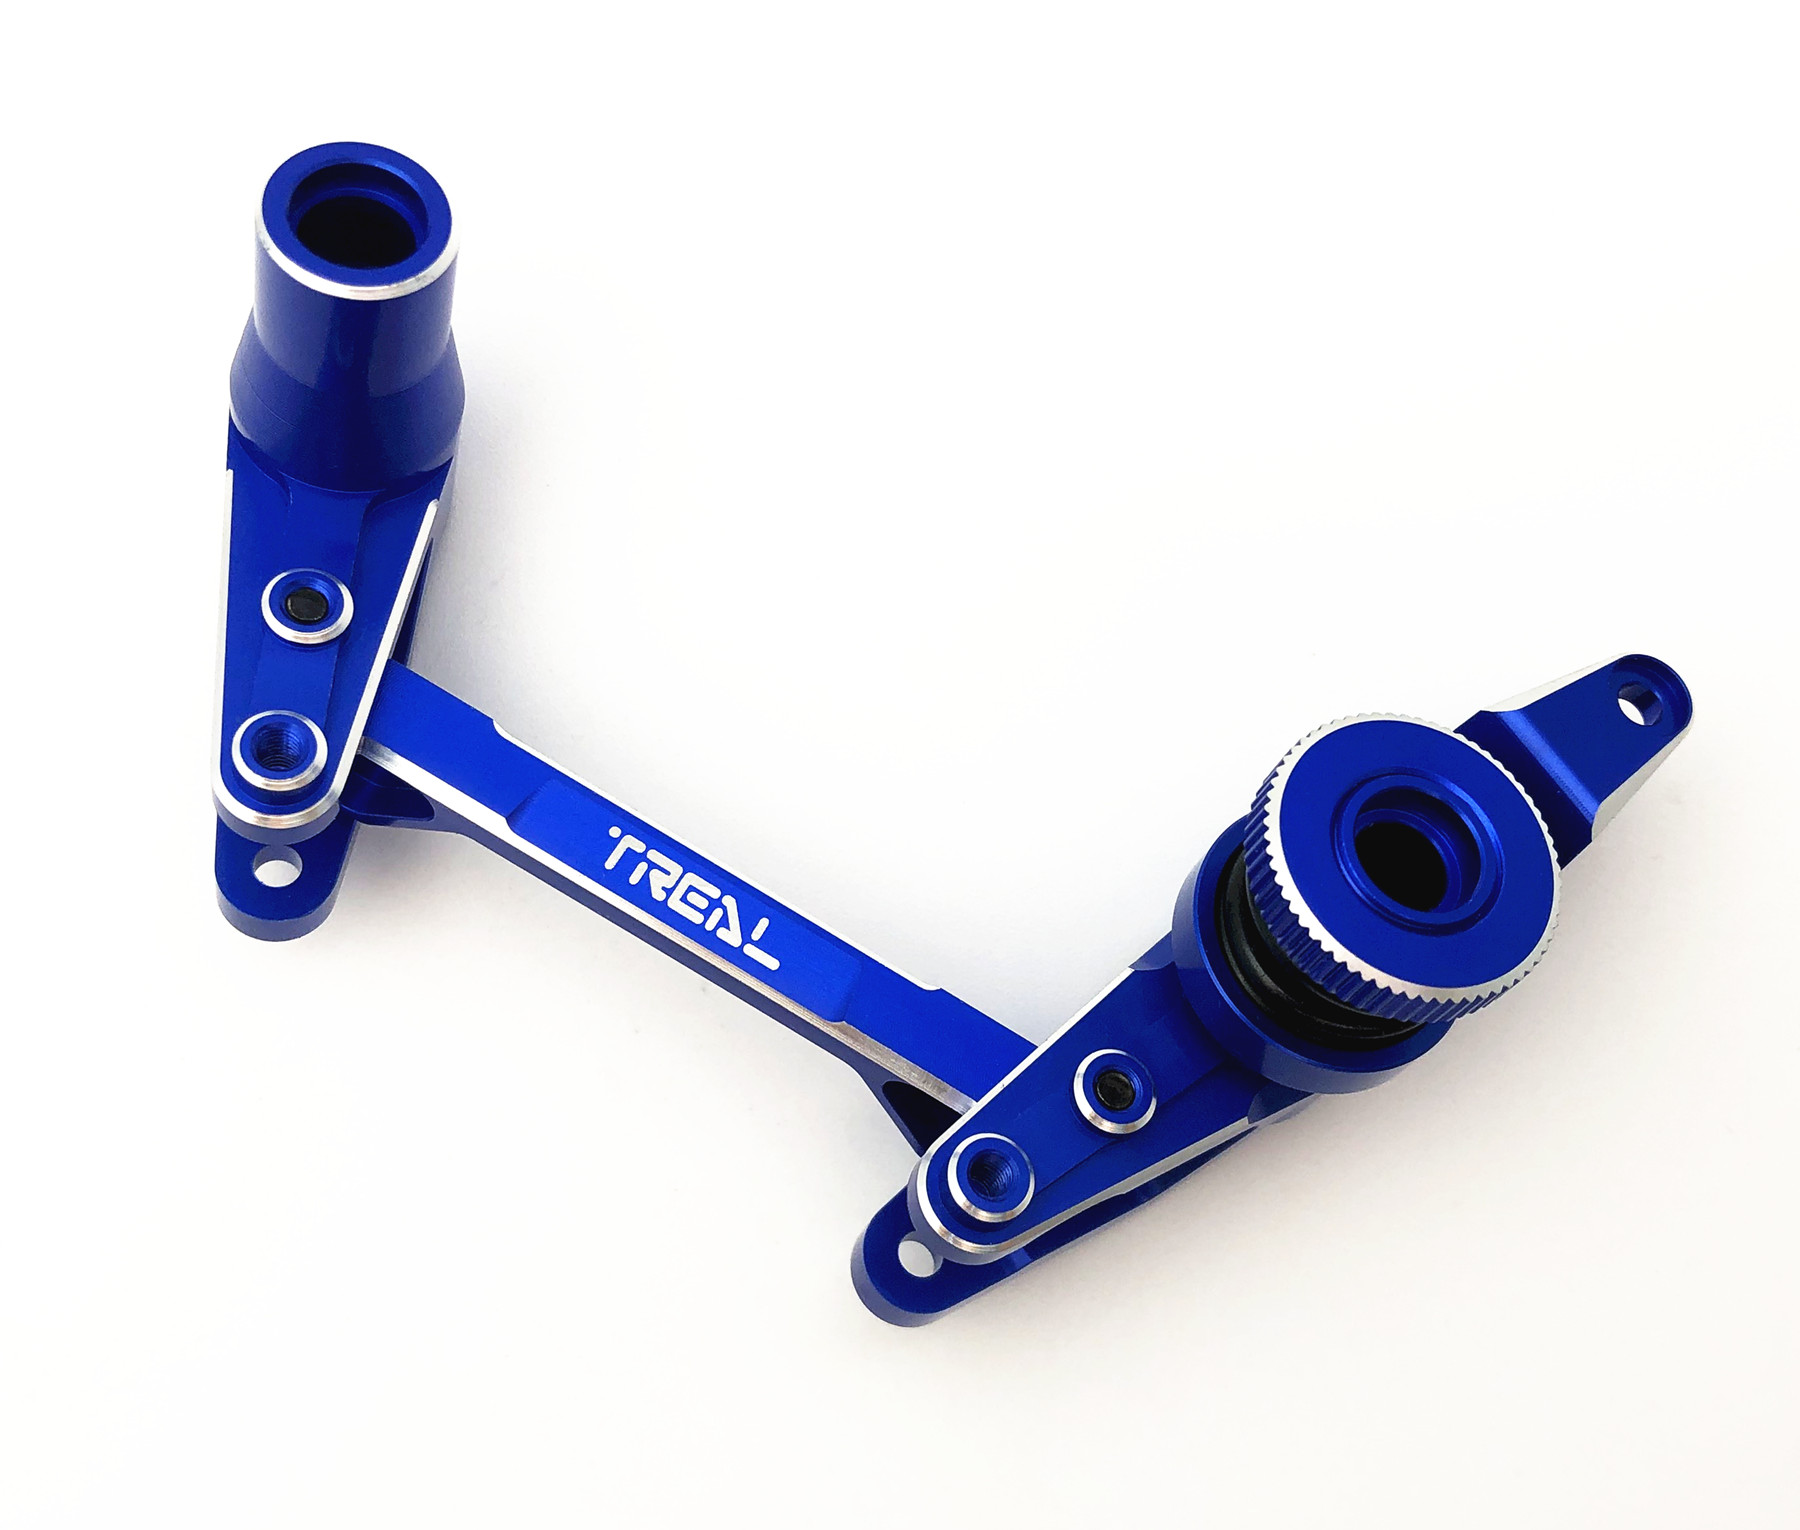 Details about   Treal Traxxas Maxx Blue Aluminum Front Steering Knuckle Arms W/ Bearings